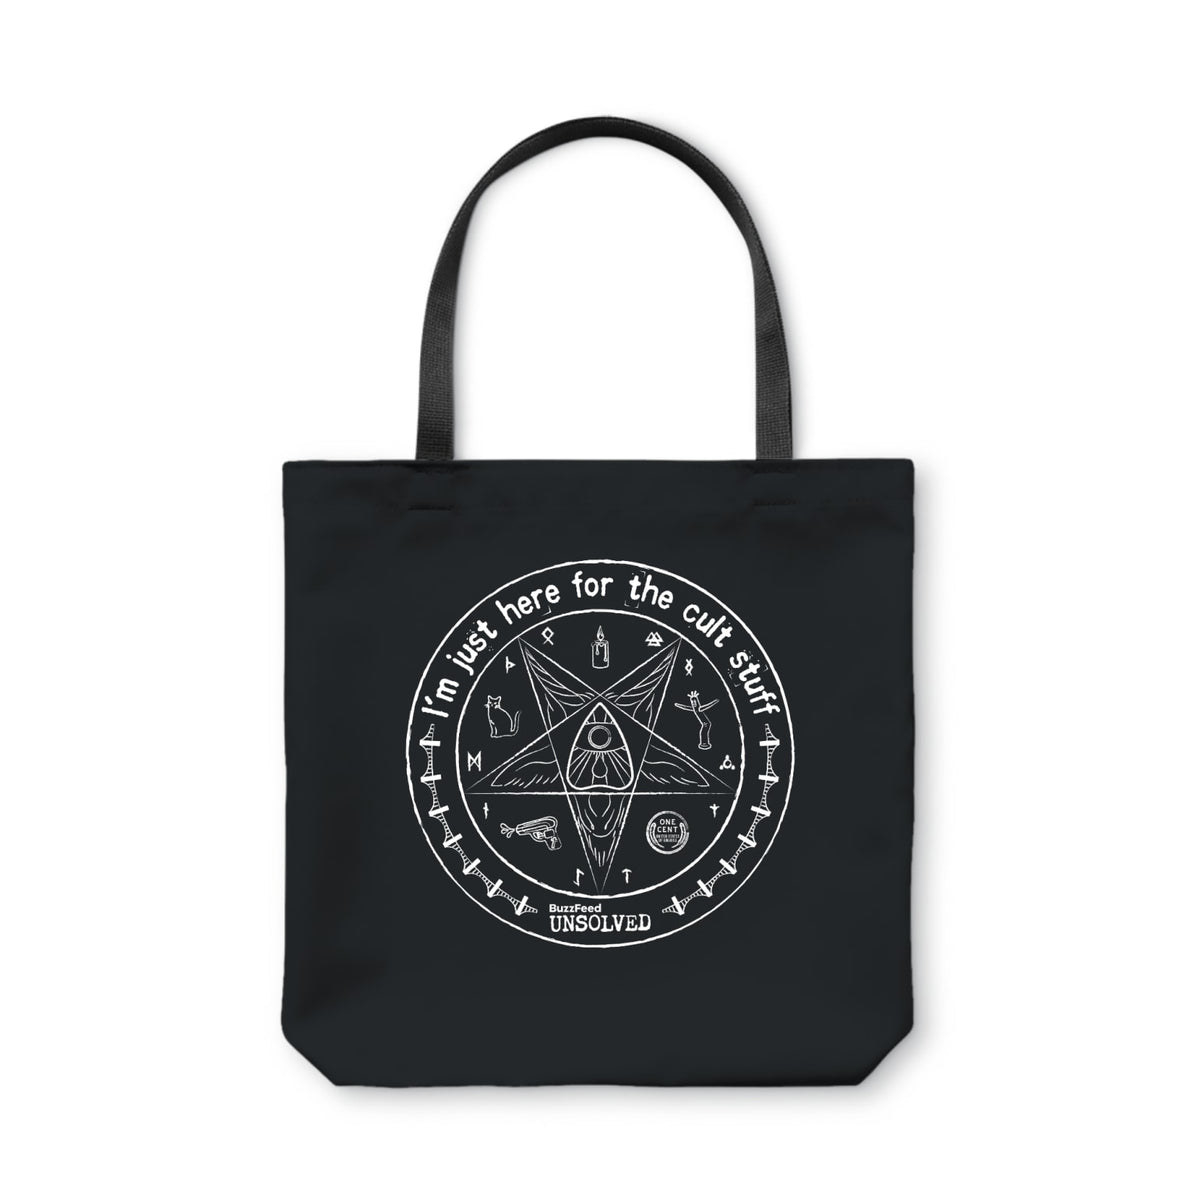 the black tote bag with white pentagram design and the text &#x27;i&#x27;m just here for the cult stuff&#x27;